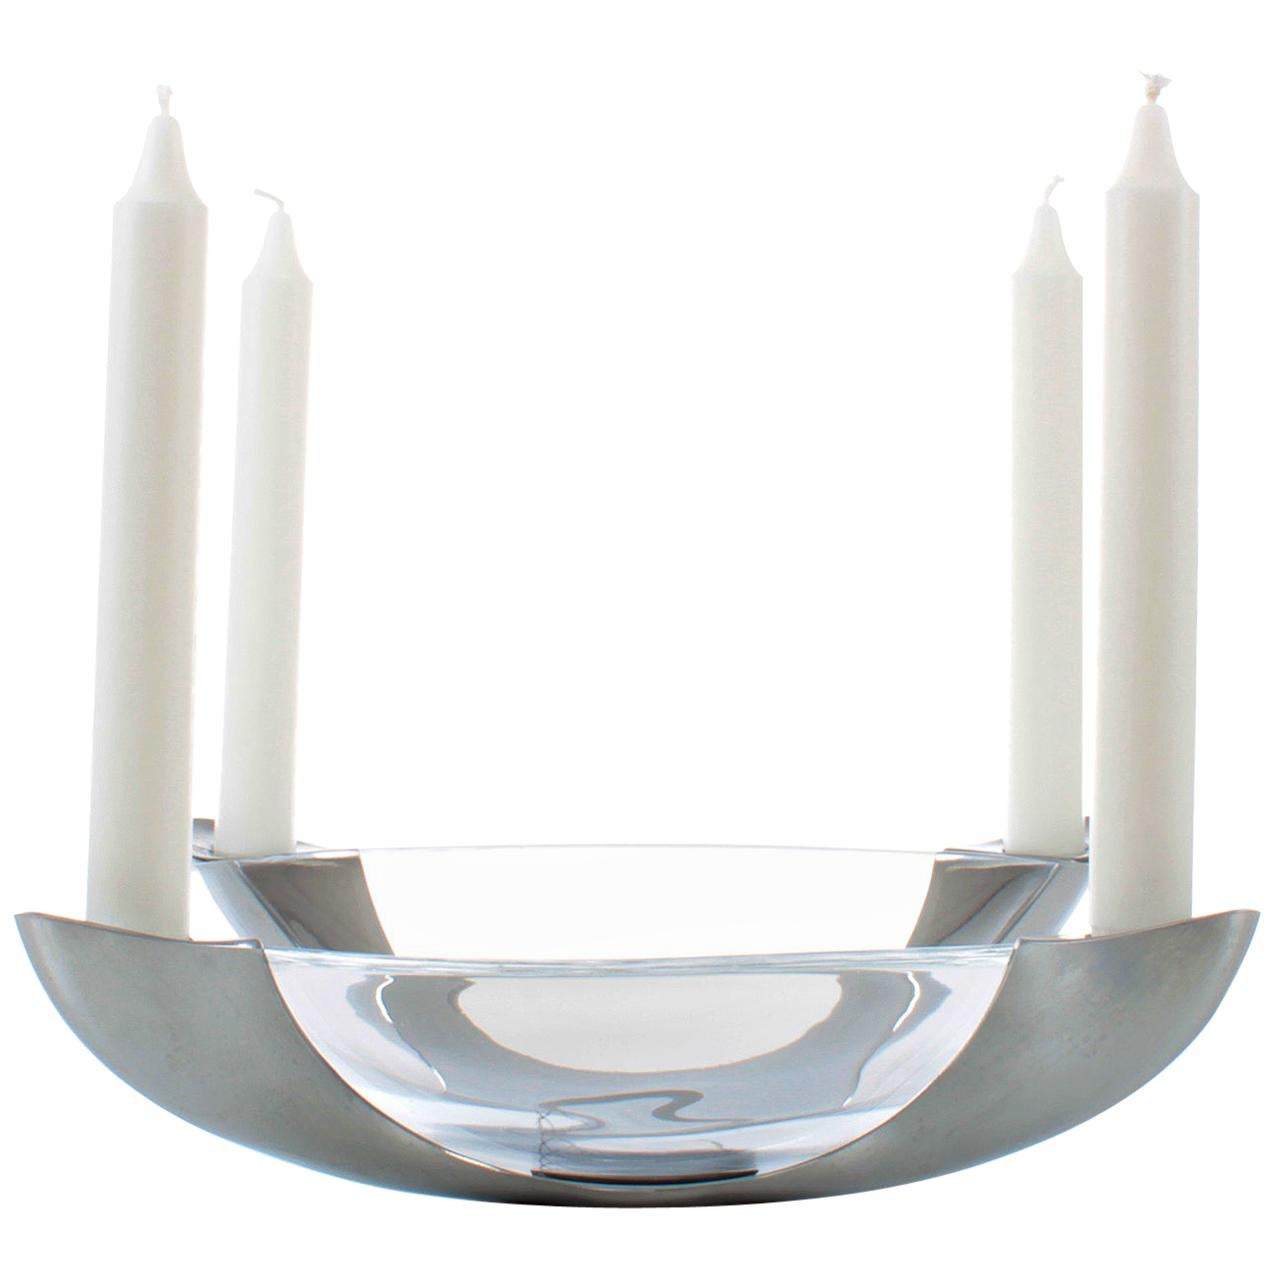 Advent Candle Holder, 4-Lights by Stelton, Modern Stainless Steel Candleholder